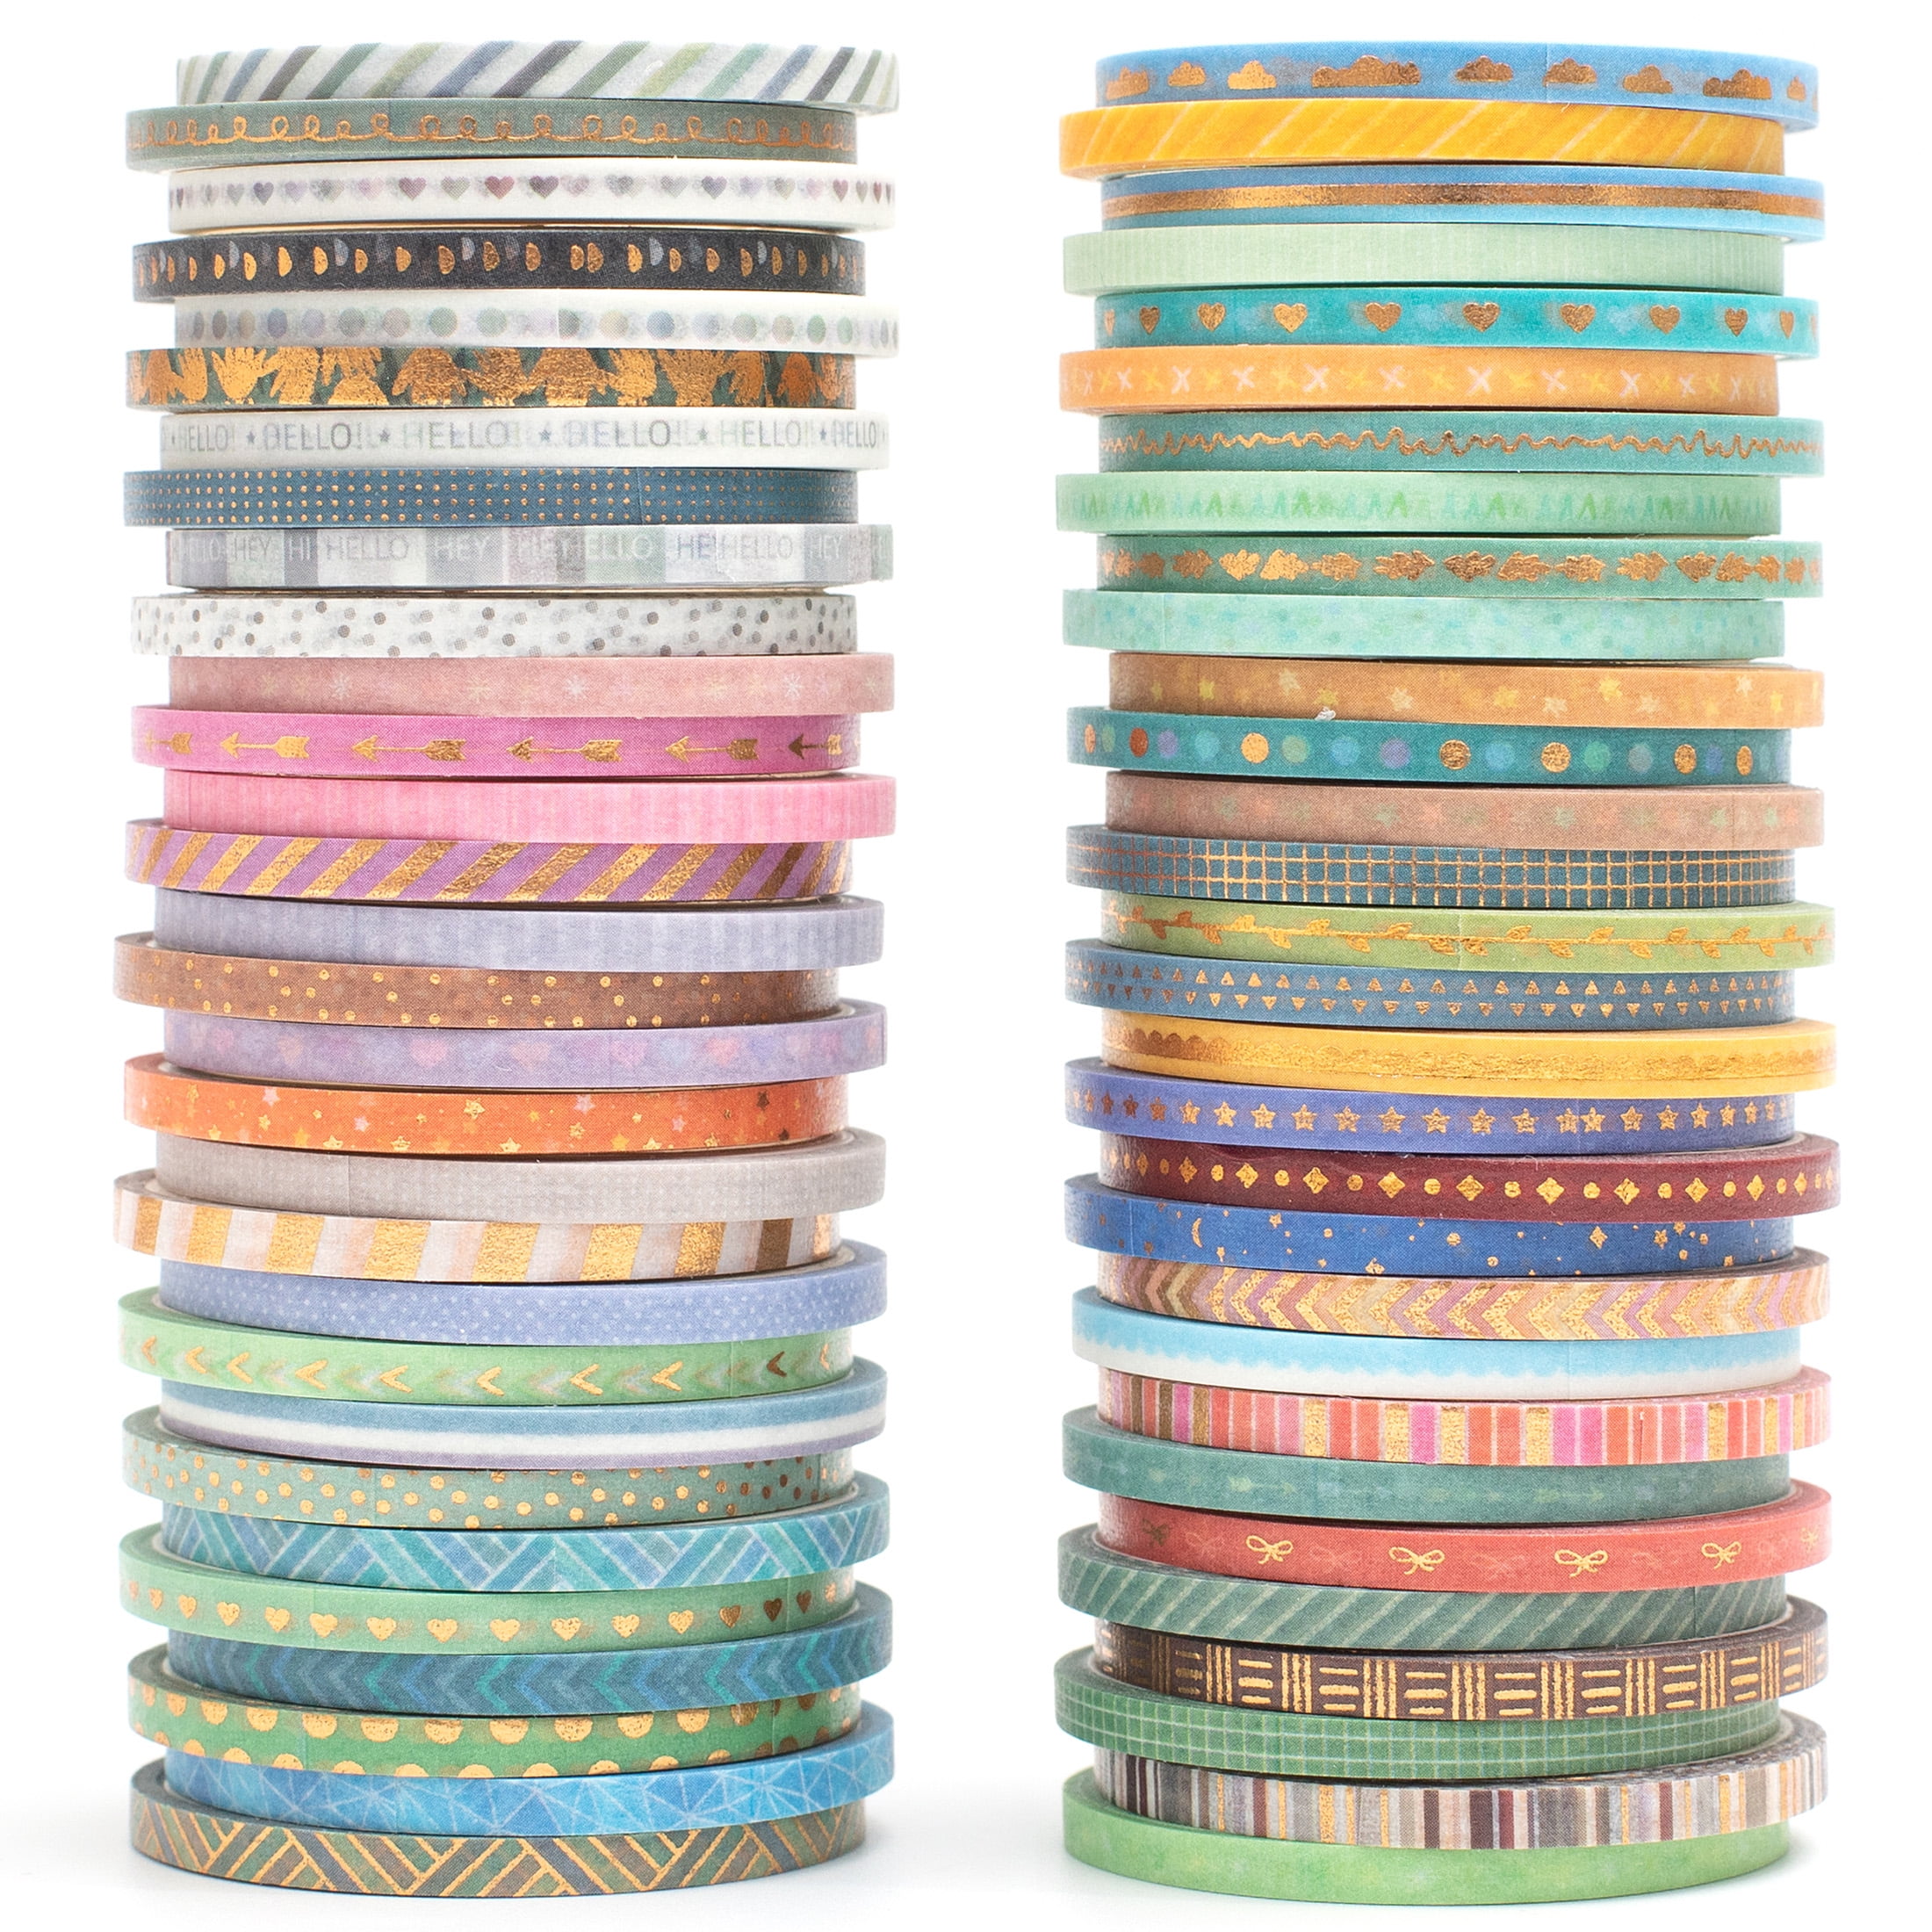 YUBX Skinny Galaxy Washi Tape Set 30 Rolls Gold Foil Starry Space Decorative Tapes, Size: This Pack of 30 Rolls, 18 Rolls Are 3/16 (5mm) in Width, 12